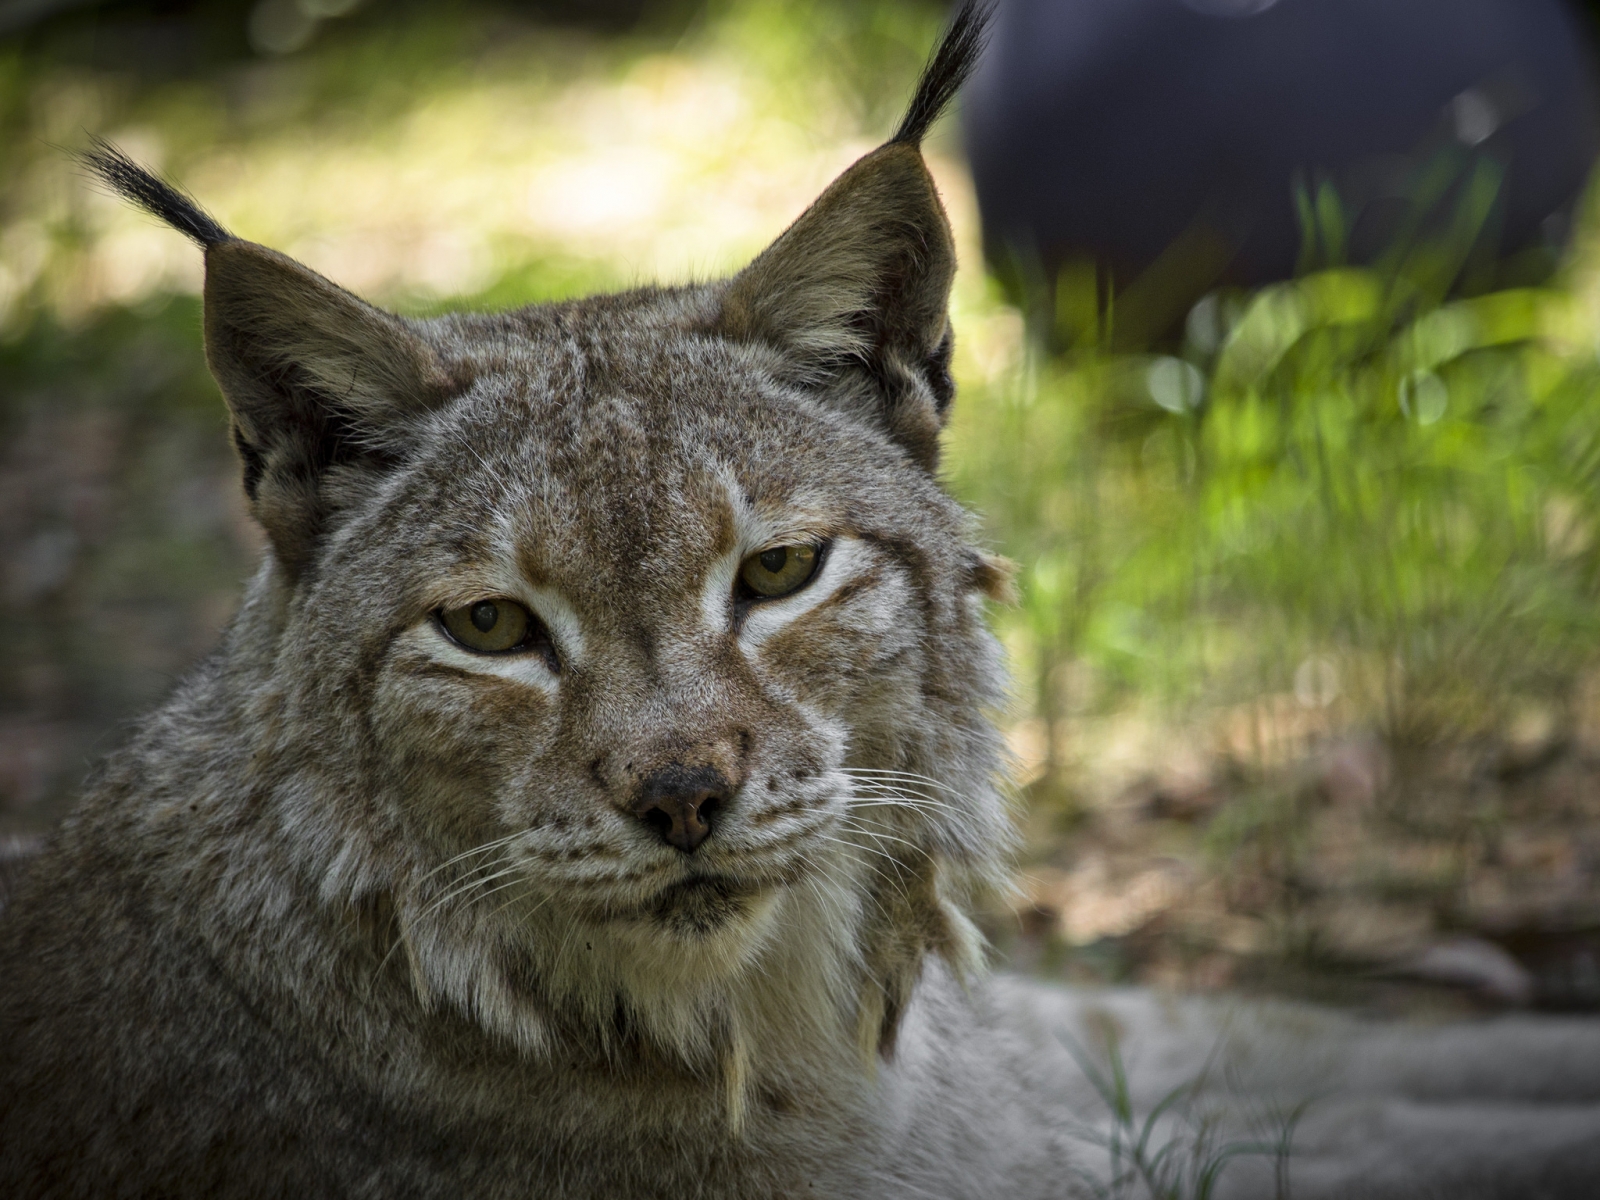 Lynx back in UK: 90% of public supports reintroduction of 